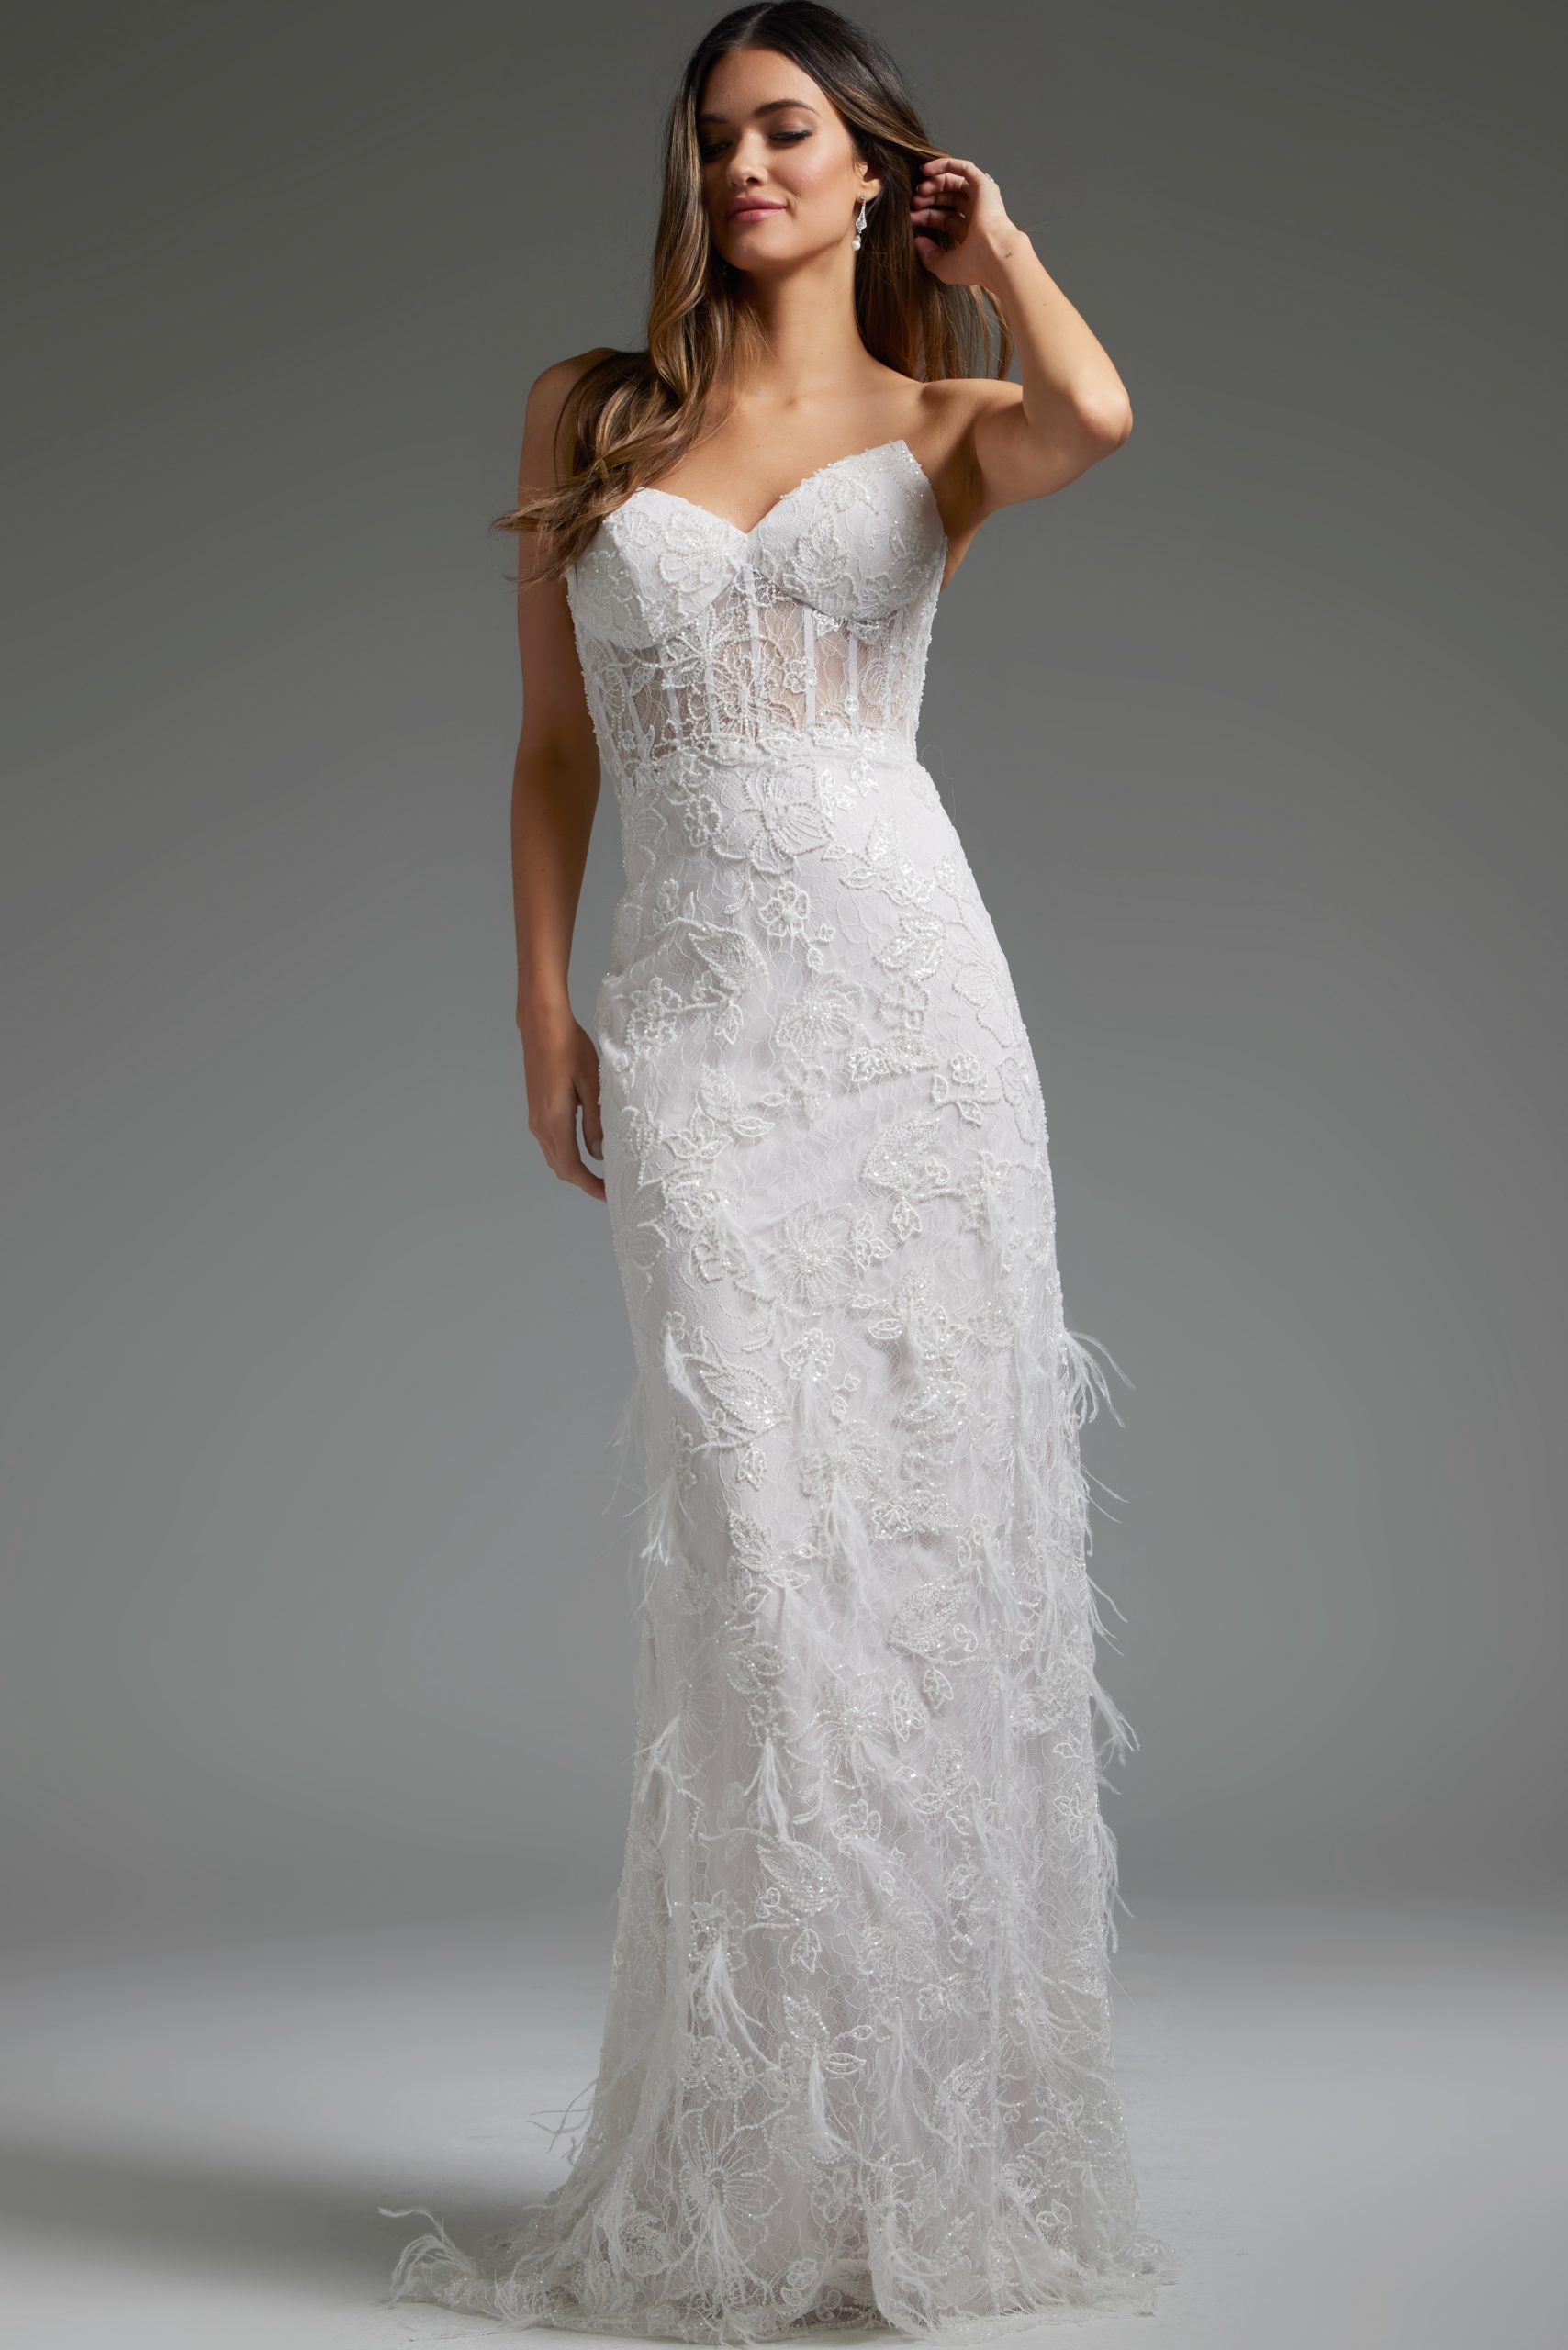 Strapless Sweetheart Neckline Lace Bridal Gown JB40590